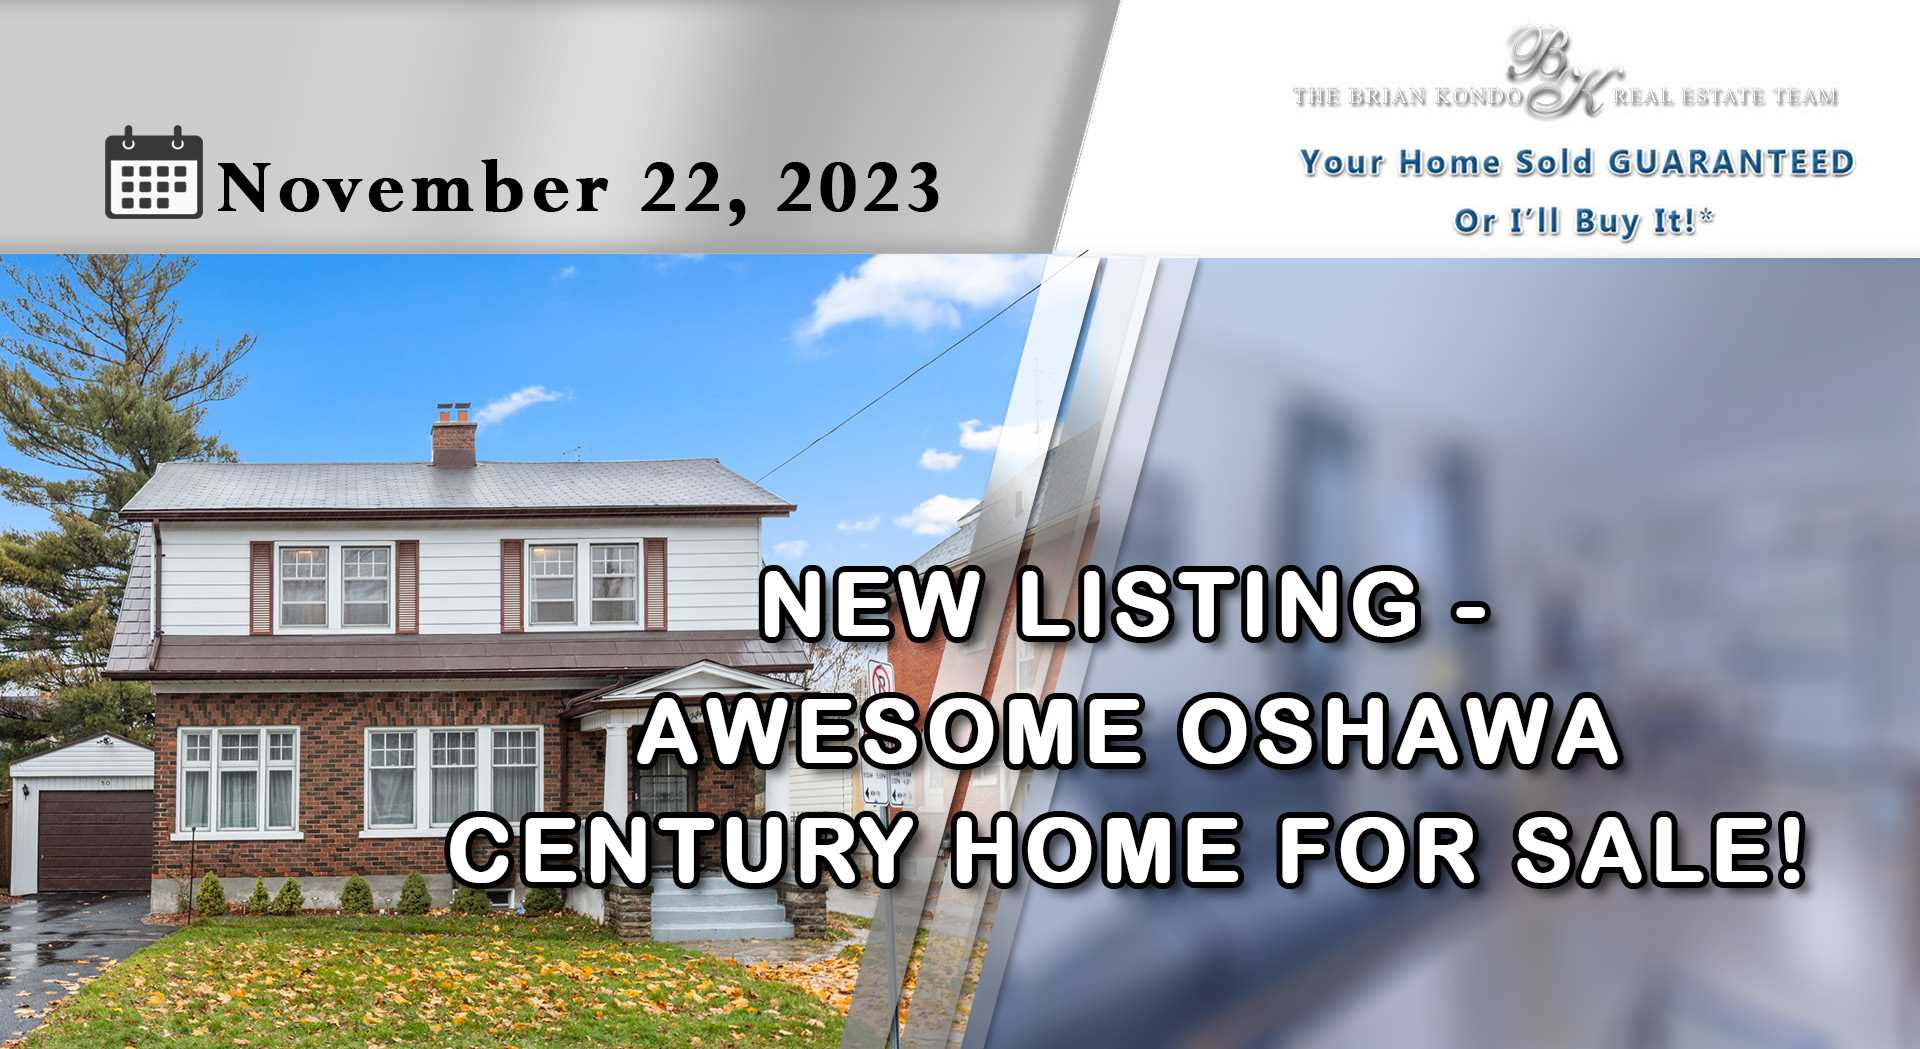 NEW LISTING - AWESOME OSHAWA CENTURY HOME FOR SALE! $699,000!